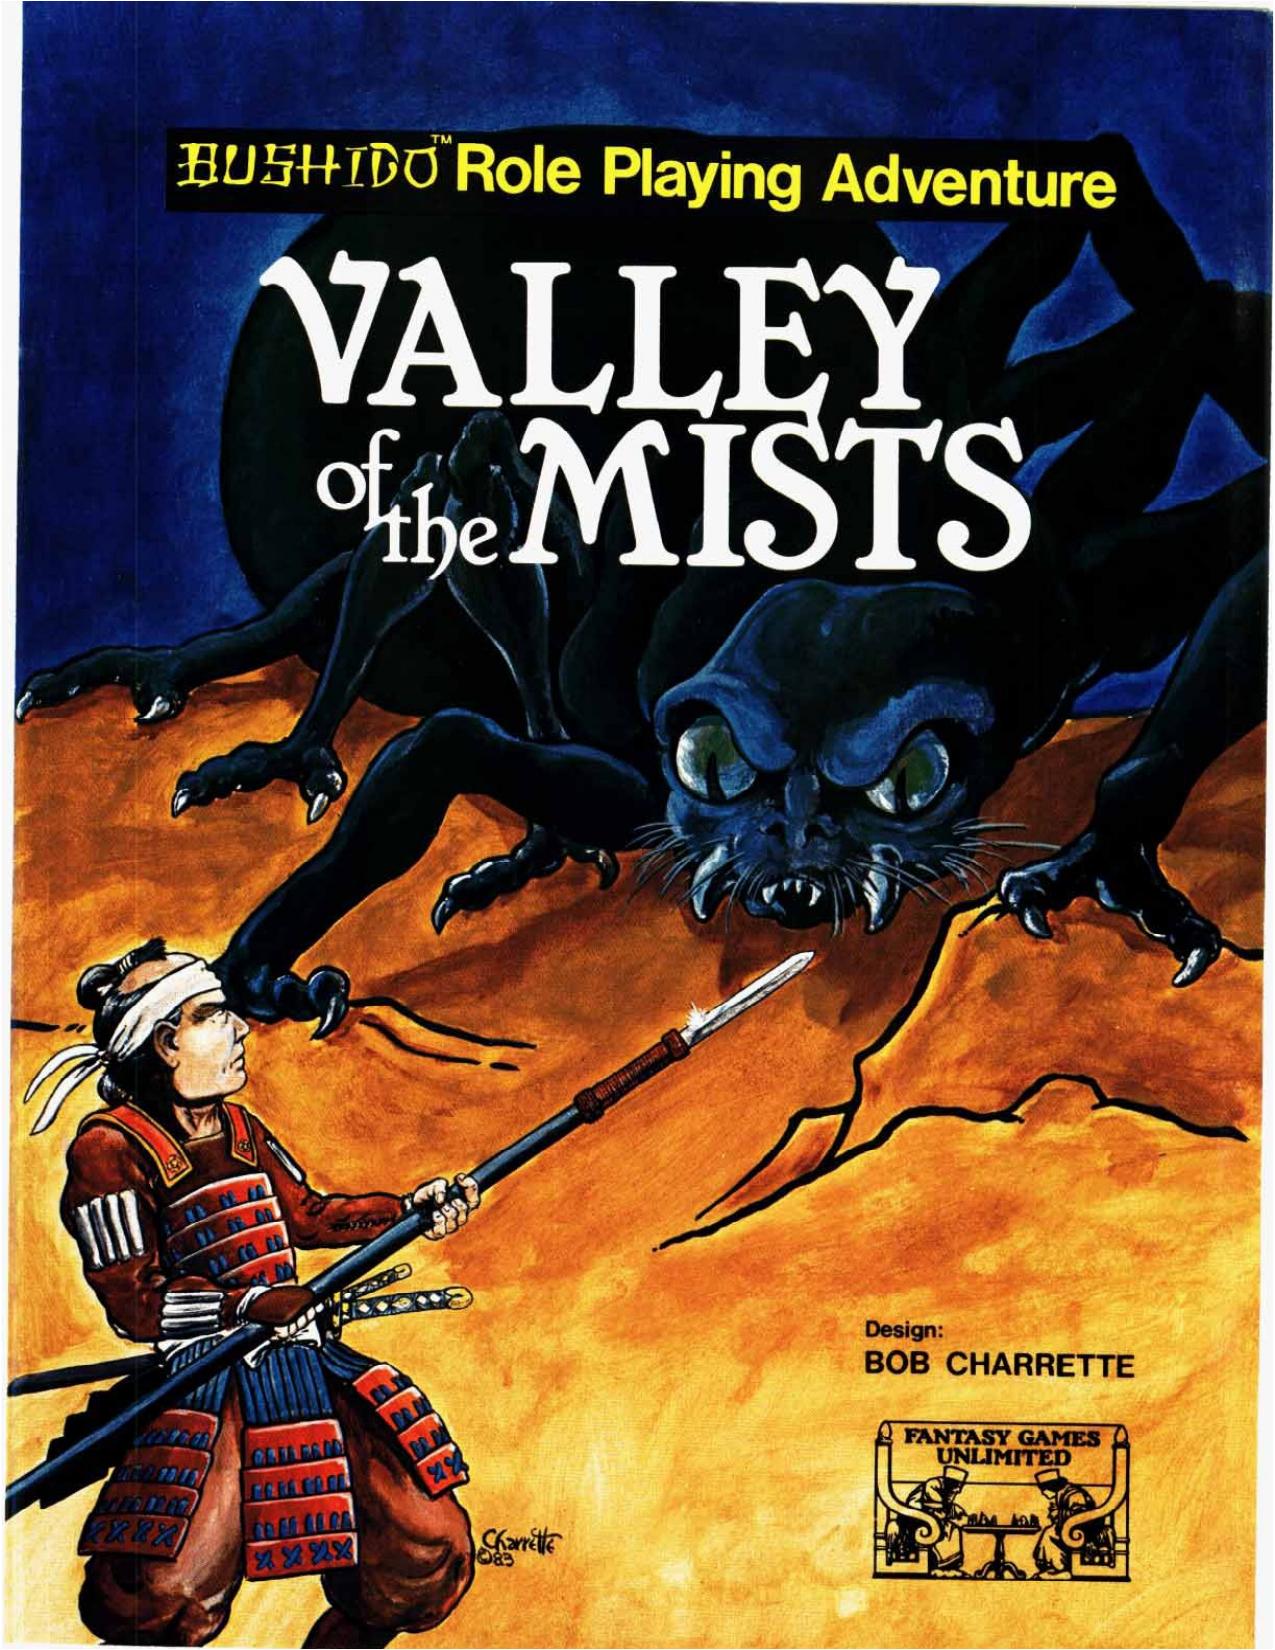 Bushido__Valley_of_the_Mist.pdf - created by pdfMachine from Broadgun Software, http://pdfmachine.com, a great PDF writer utility!